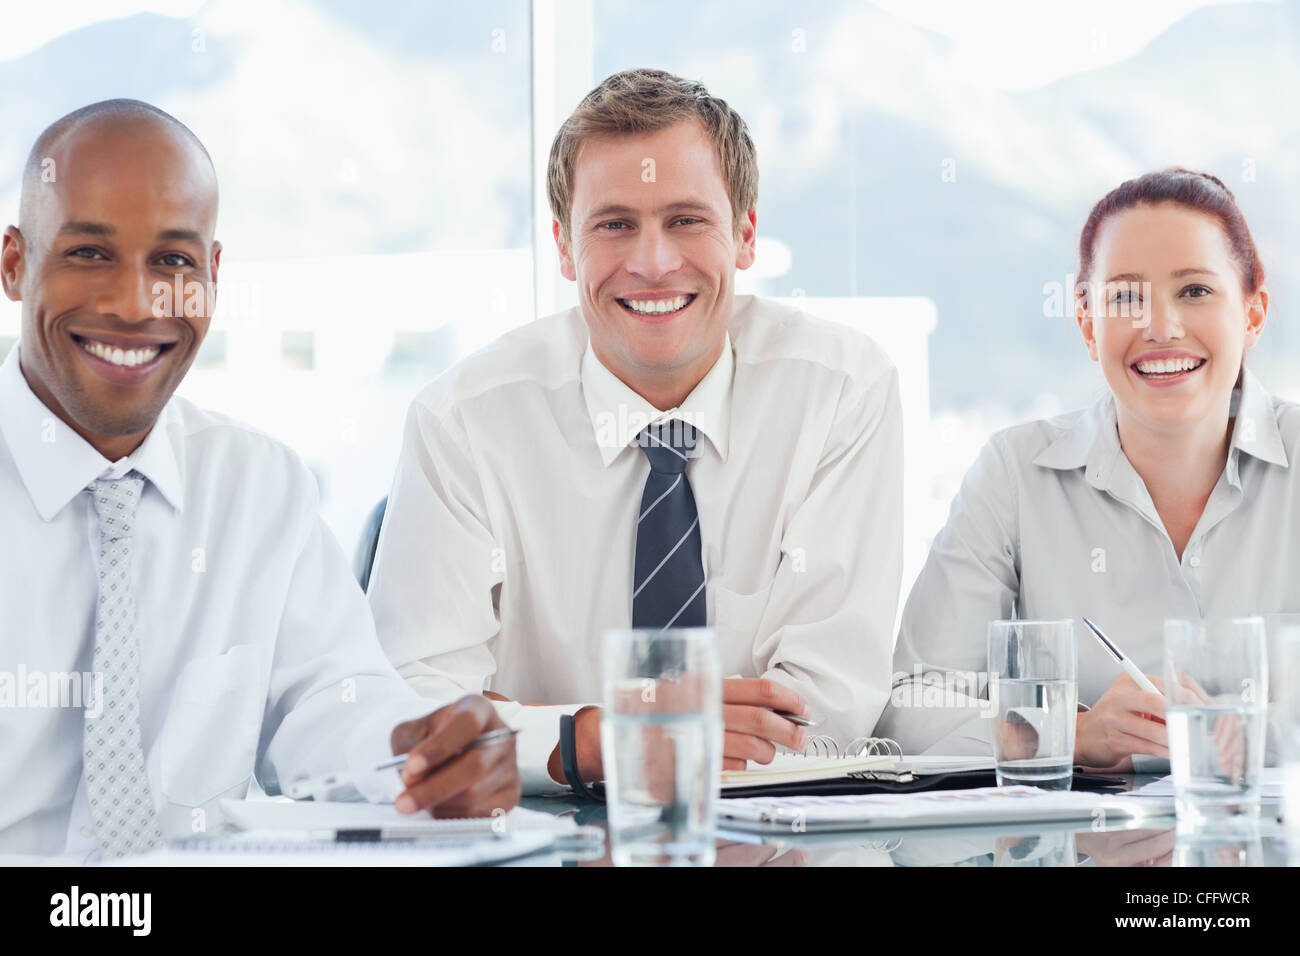 Smiling businesspeople sitting together at a table Stock Photo